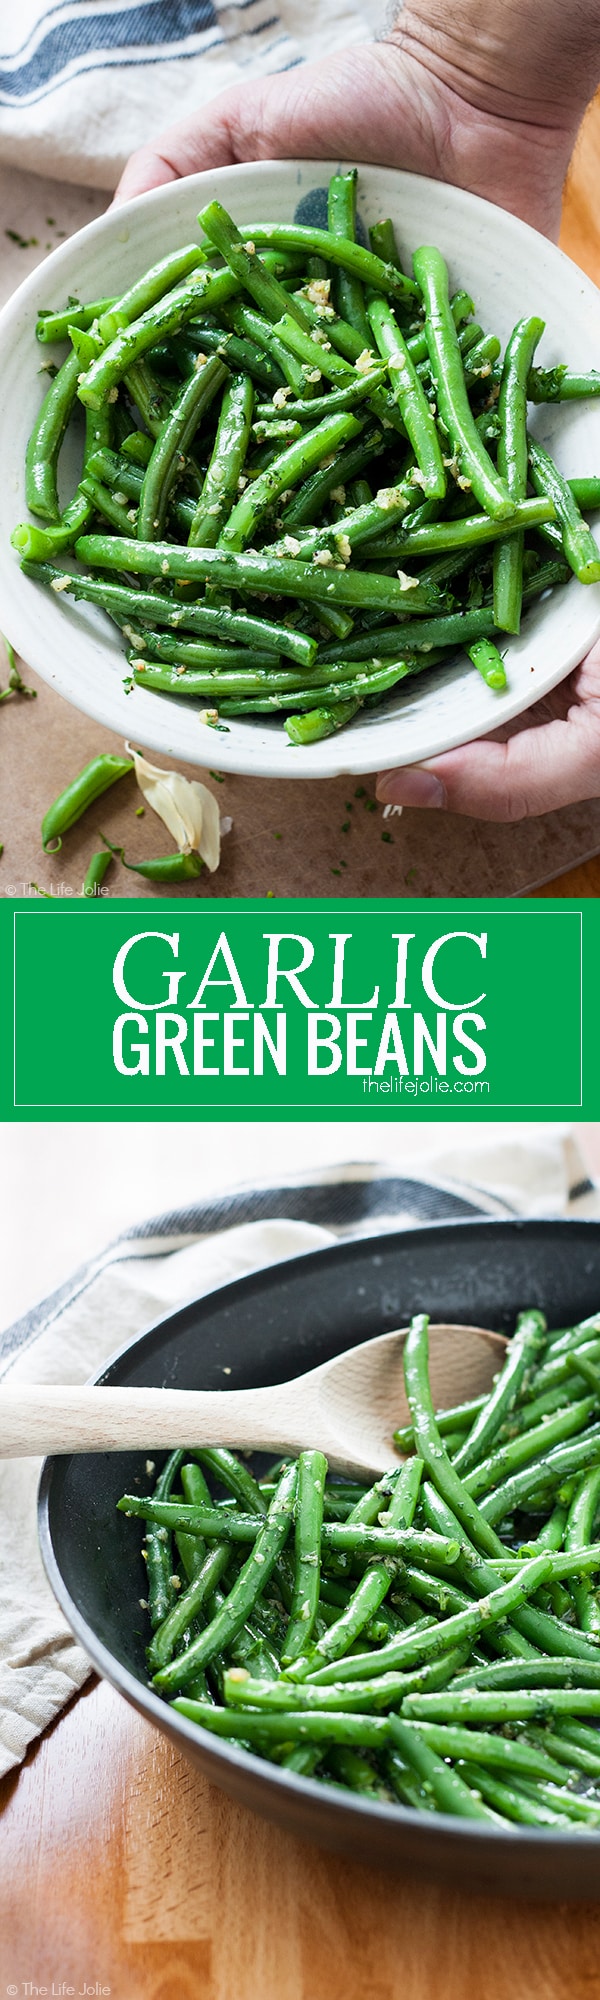 Garlic Green Beans is one of my favorite side dish recipes! It's easy to make and pretty healthy with Crispy Green Beans sauteed in a skillet. Fresh parley adds a great, herbaceous brightness with a little bit of butter and garlic. This is special enough food for Thanksgiving or any other holiday meal and also great in a pinch on a busy weeknight!